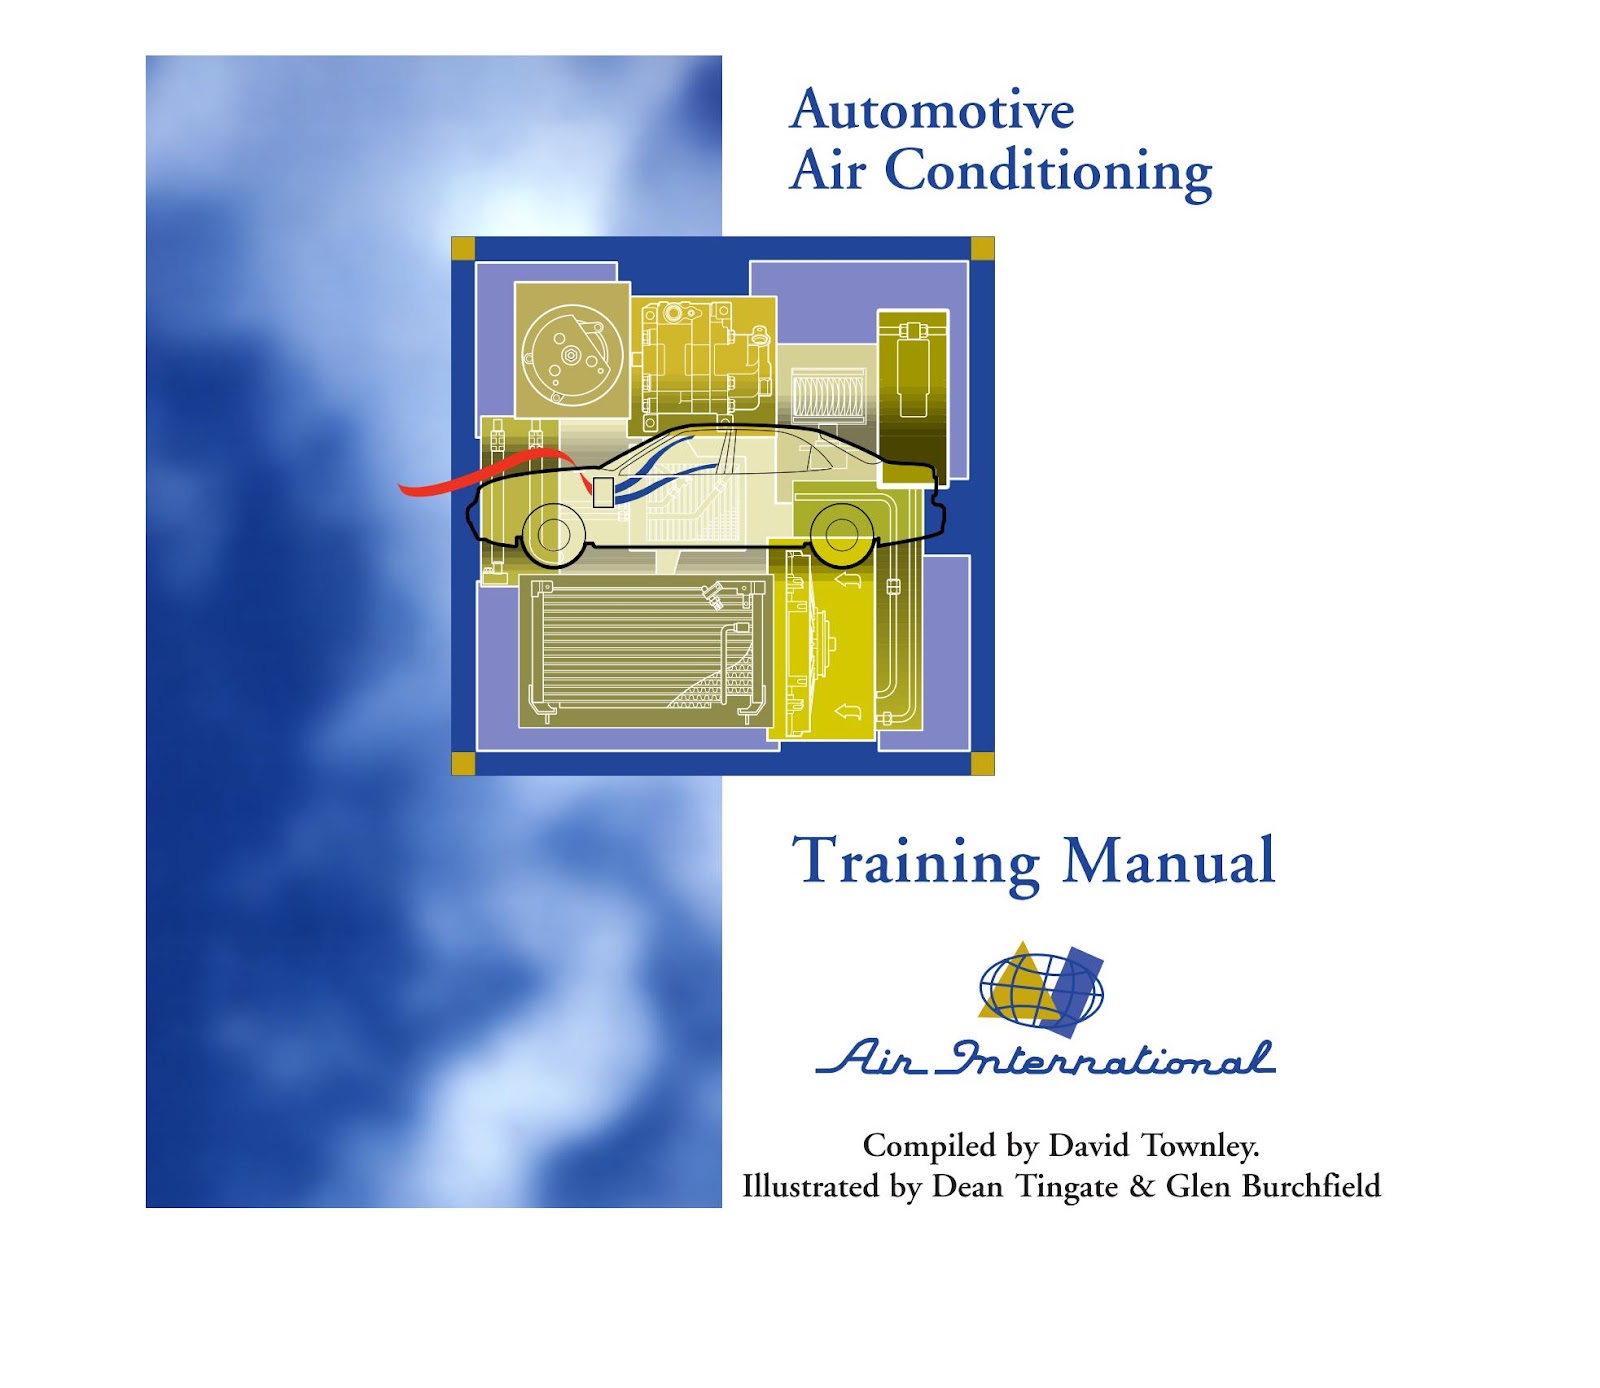 Free Download Automotive Air ConditioningTraining Manual